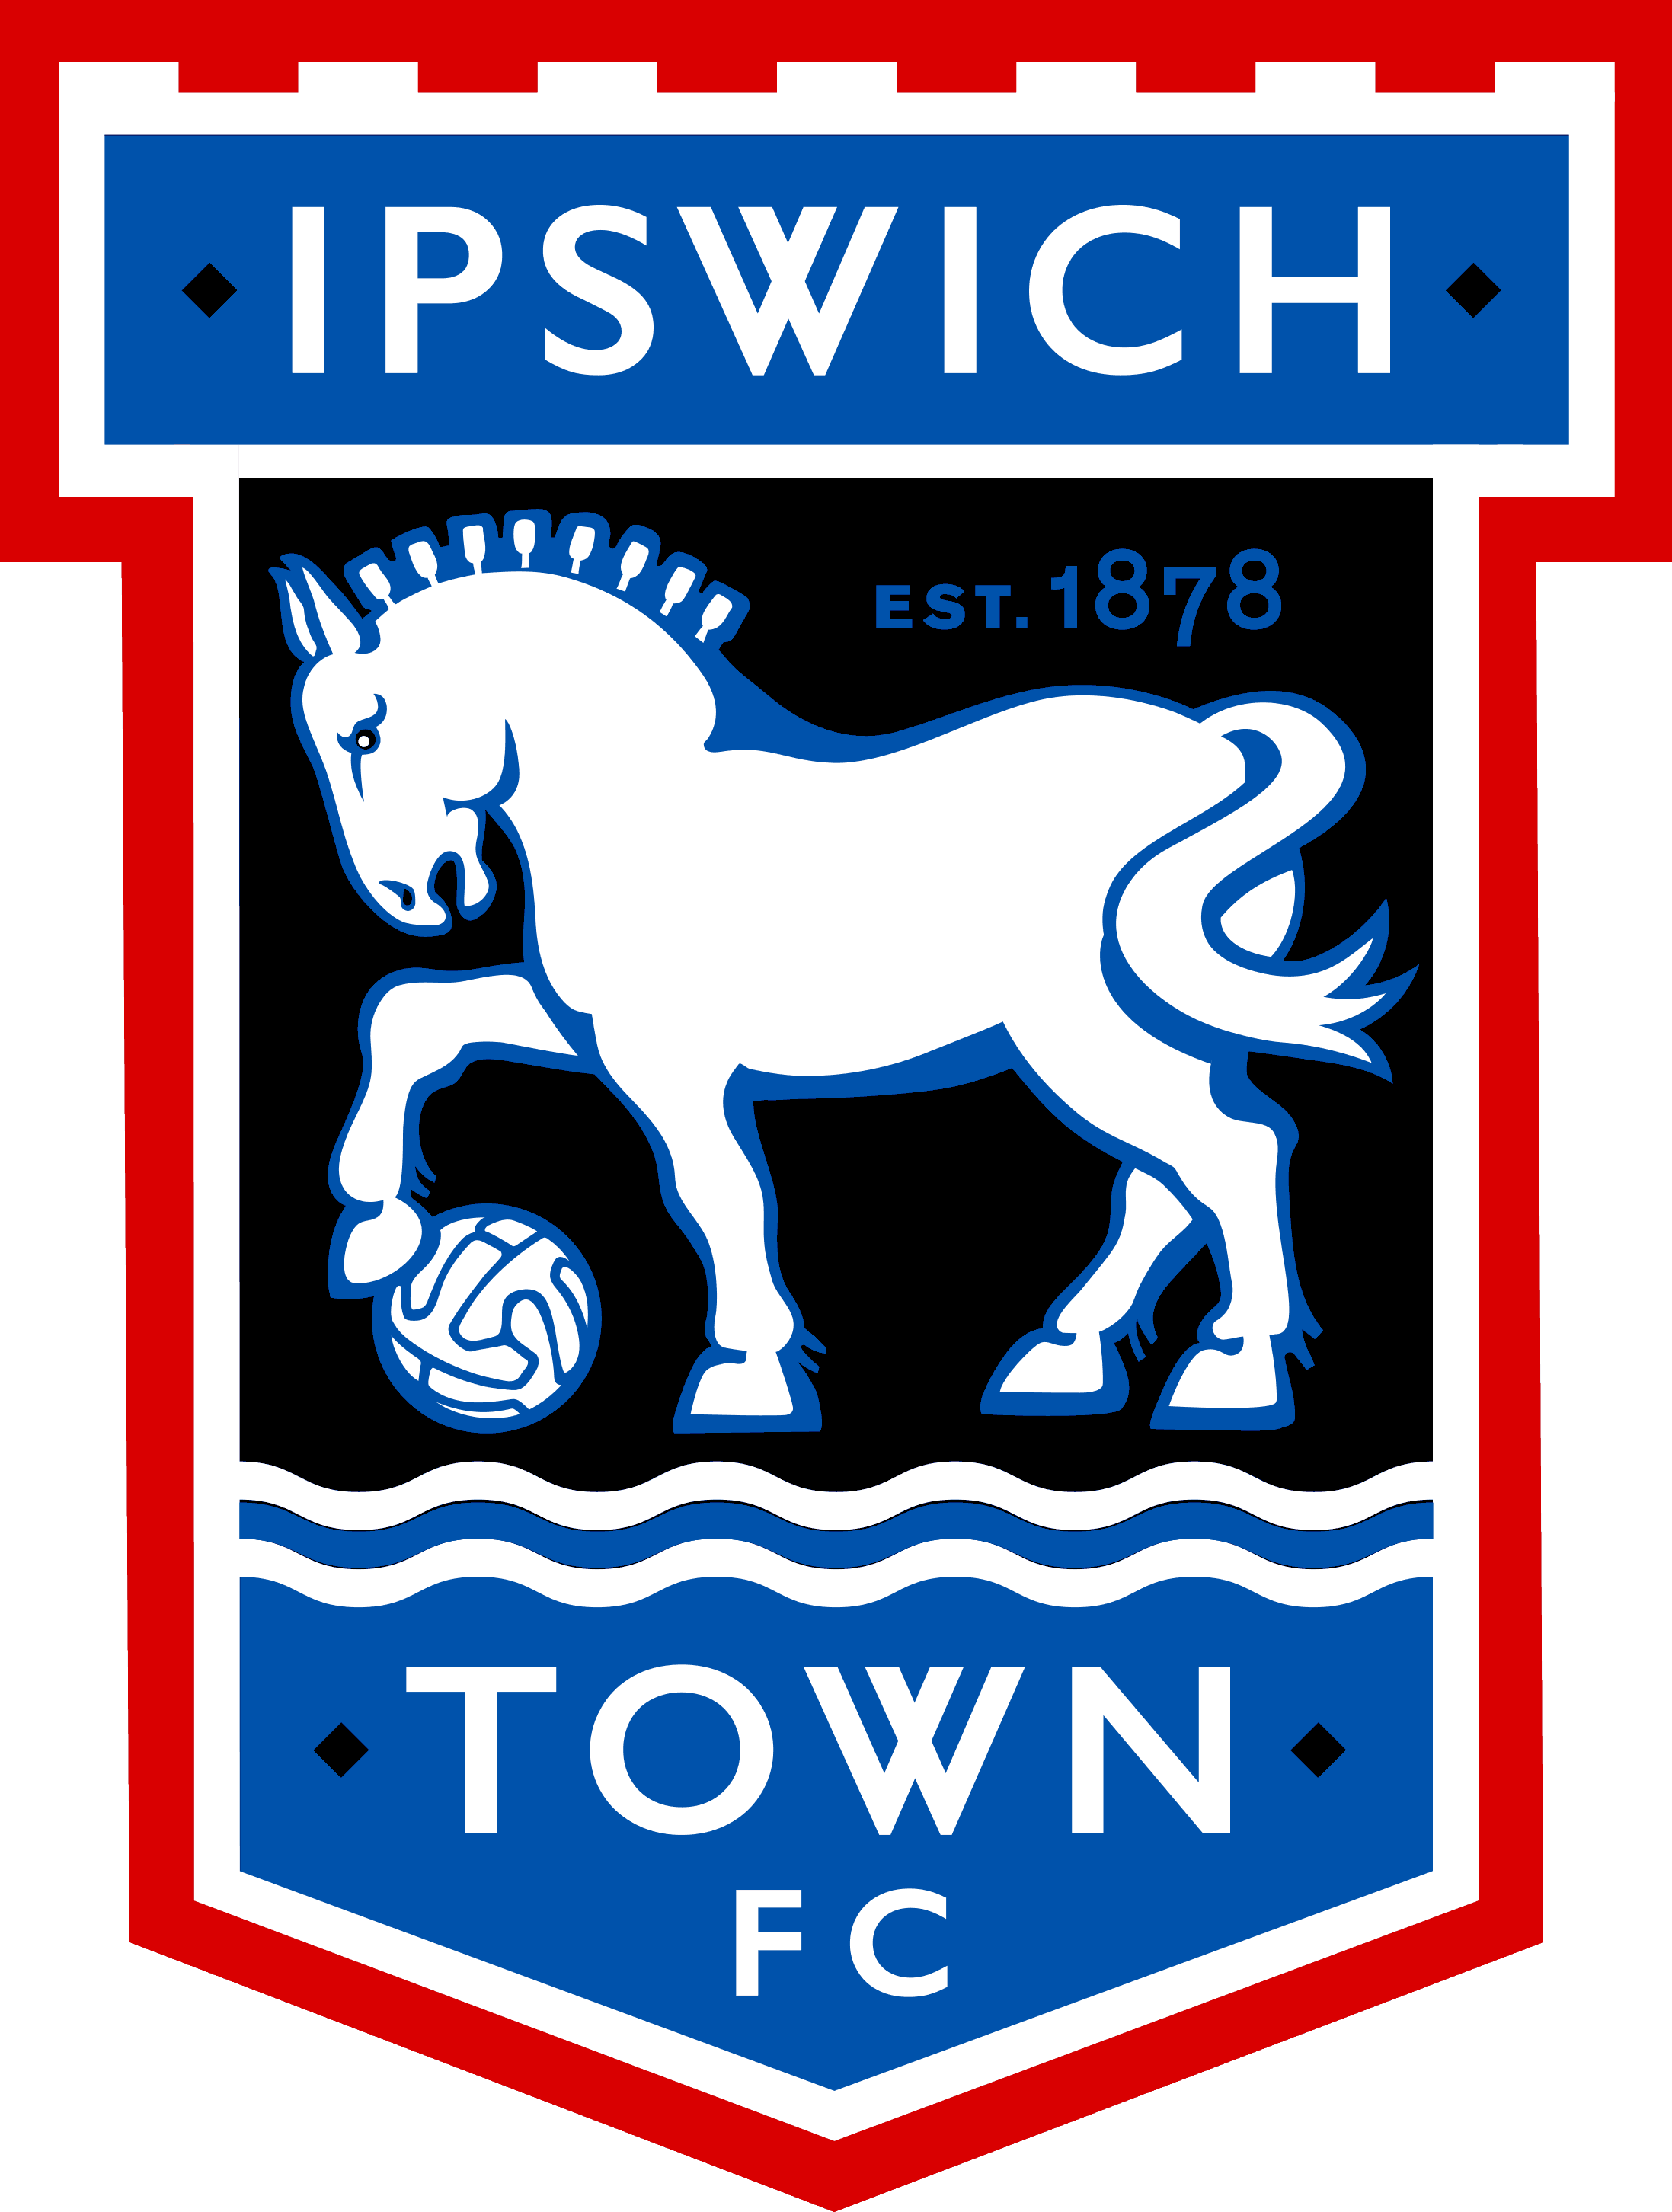 Ipswich Town badge redesigned. Just for fun. | Come Hither Design : News